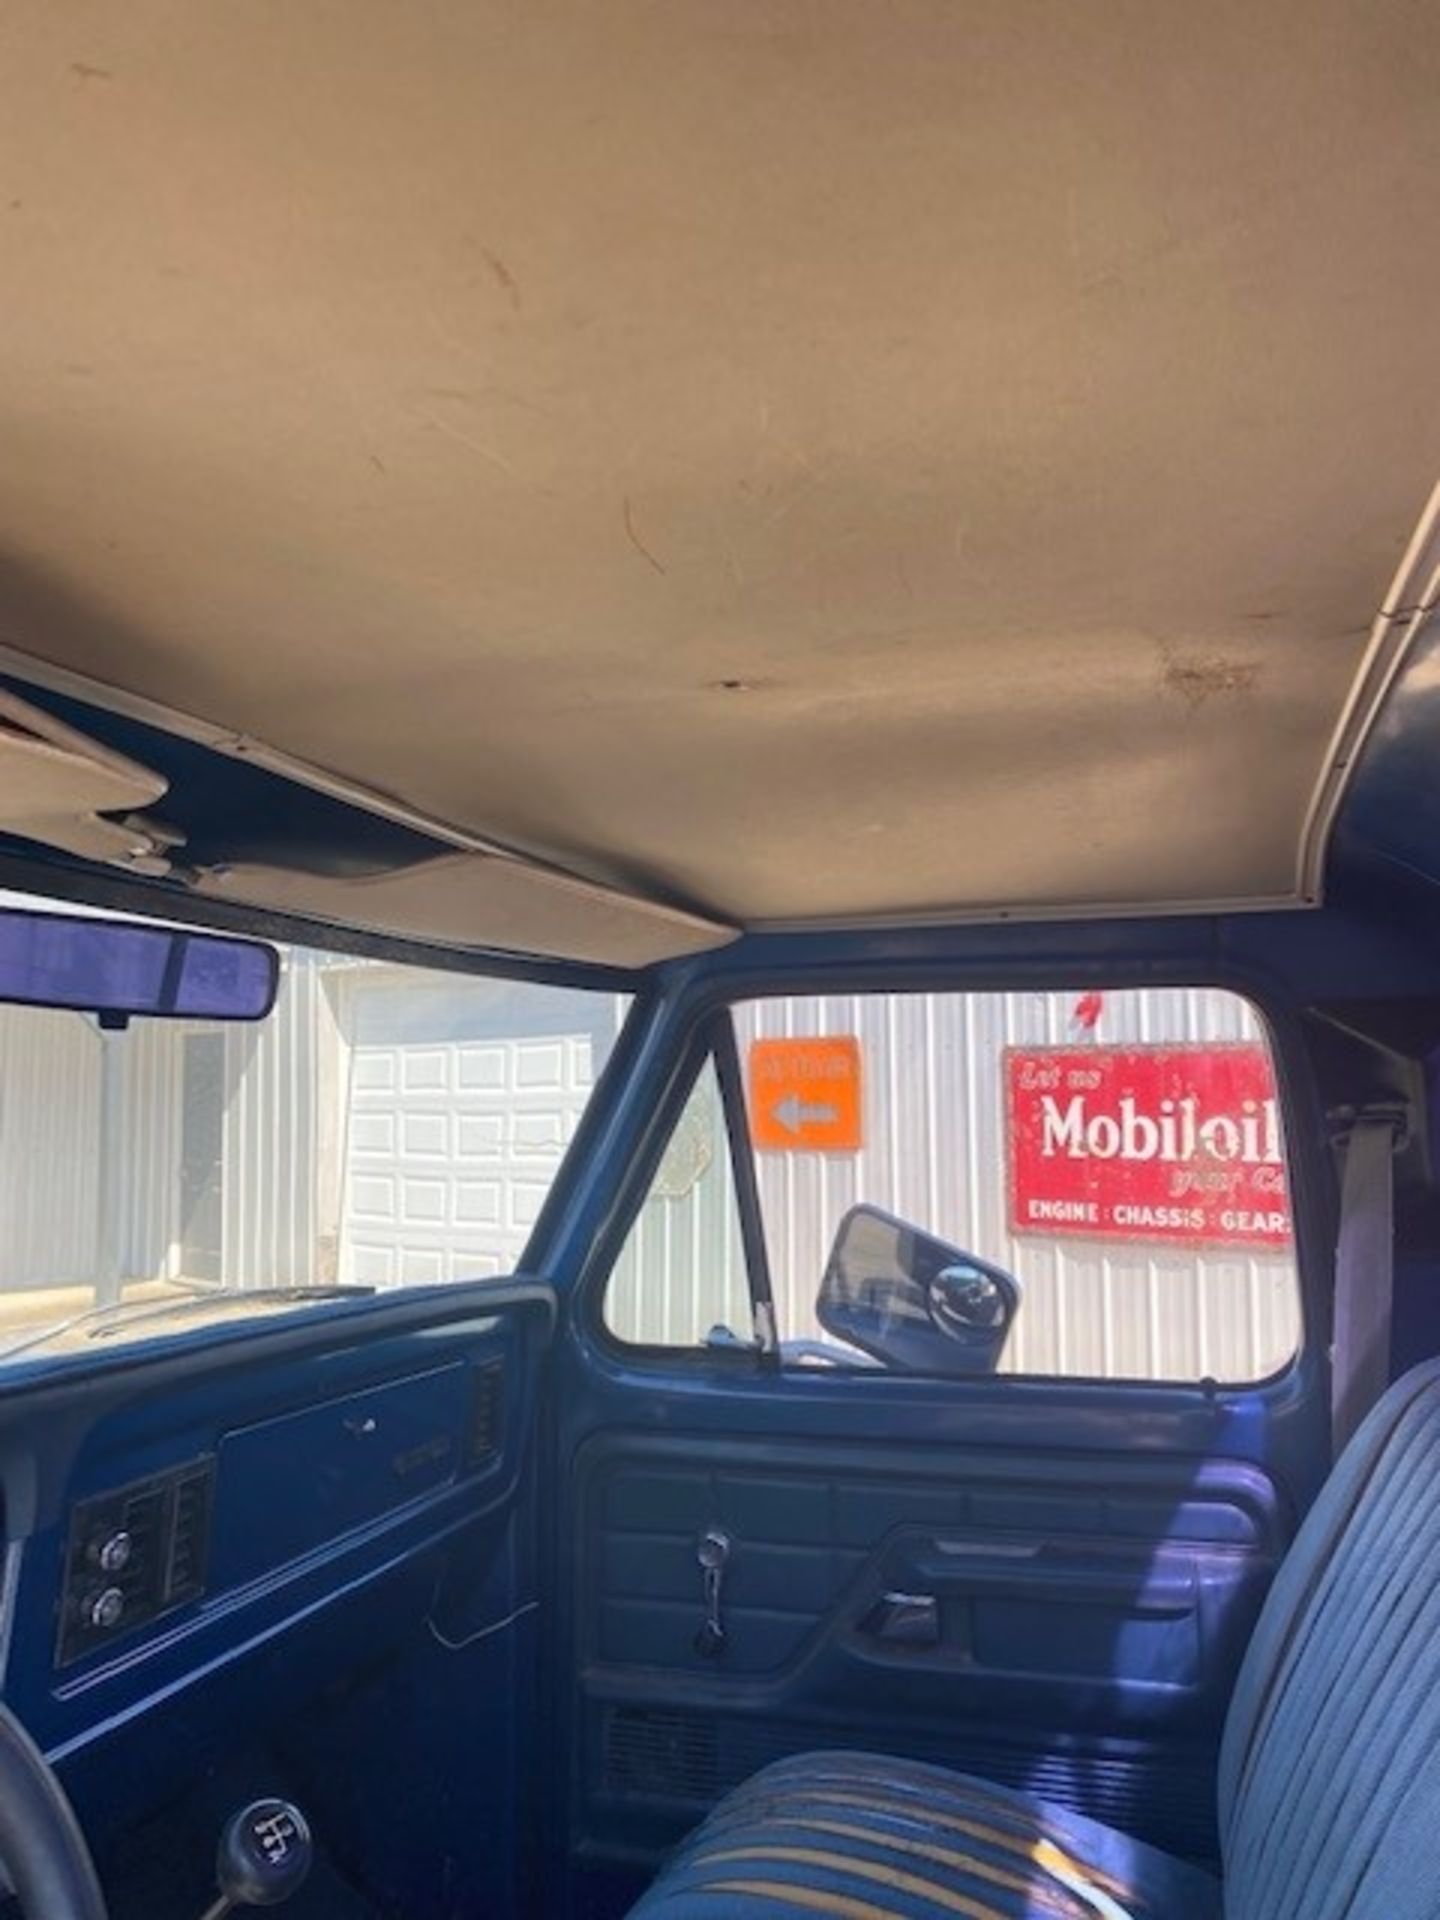 1977 Ford F150 Pickup - Image 18 of 20